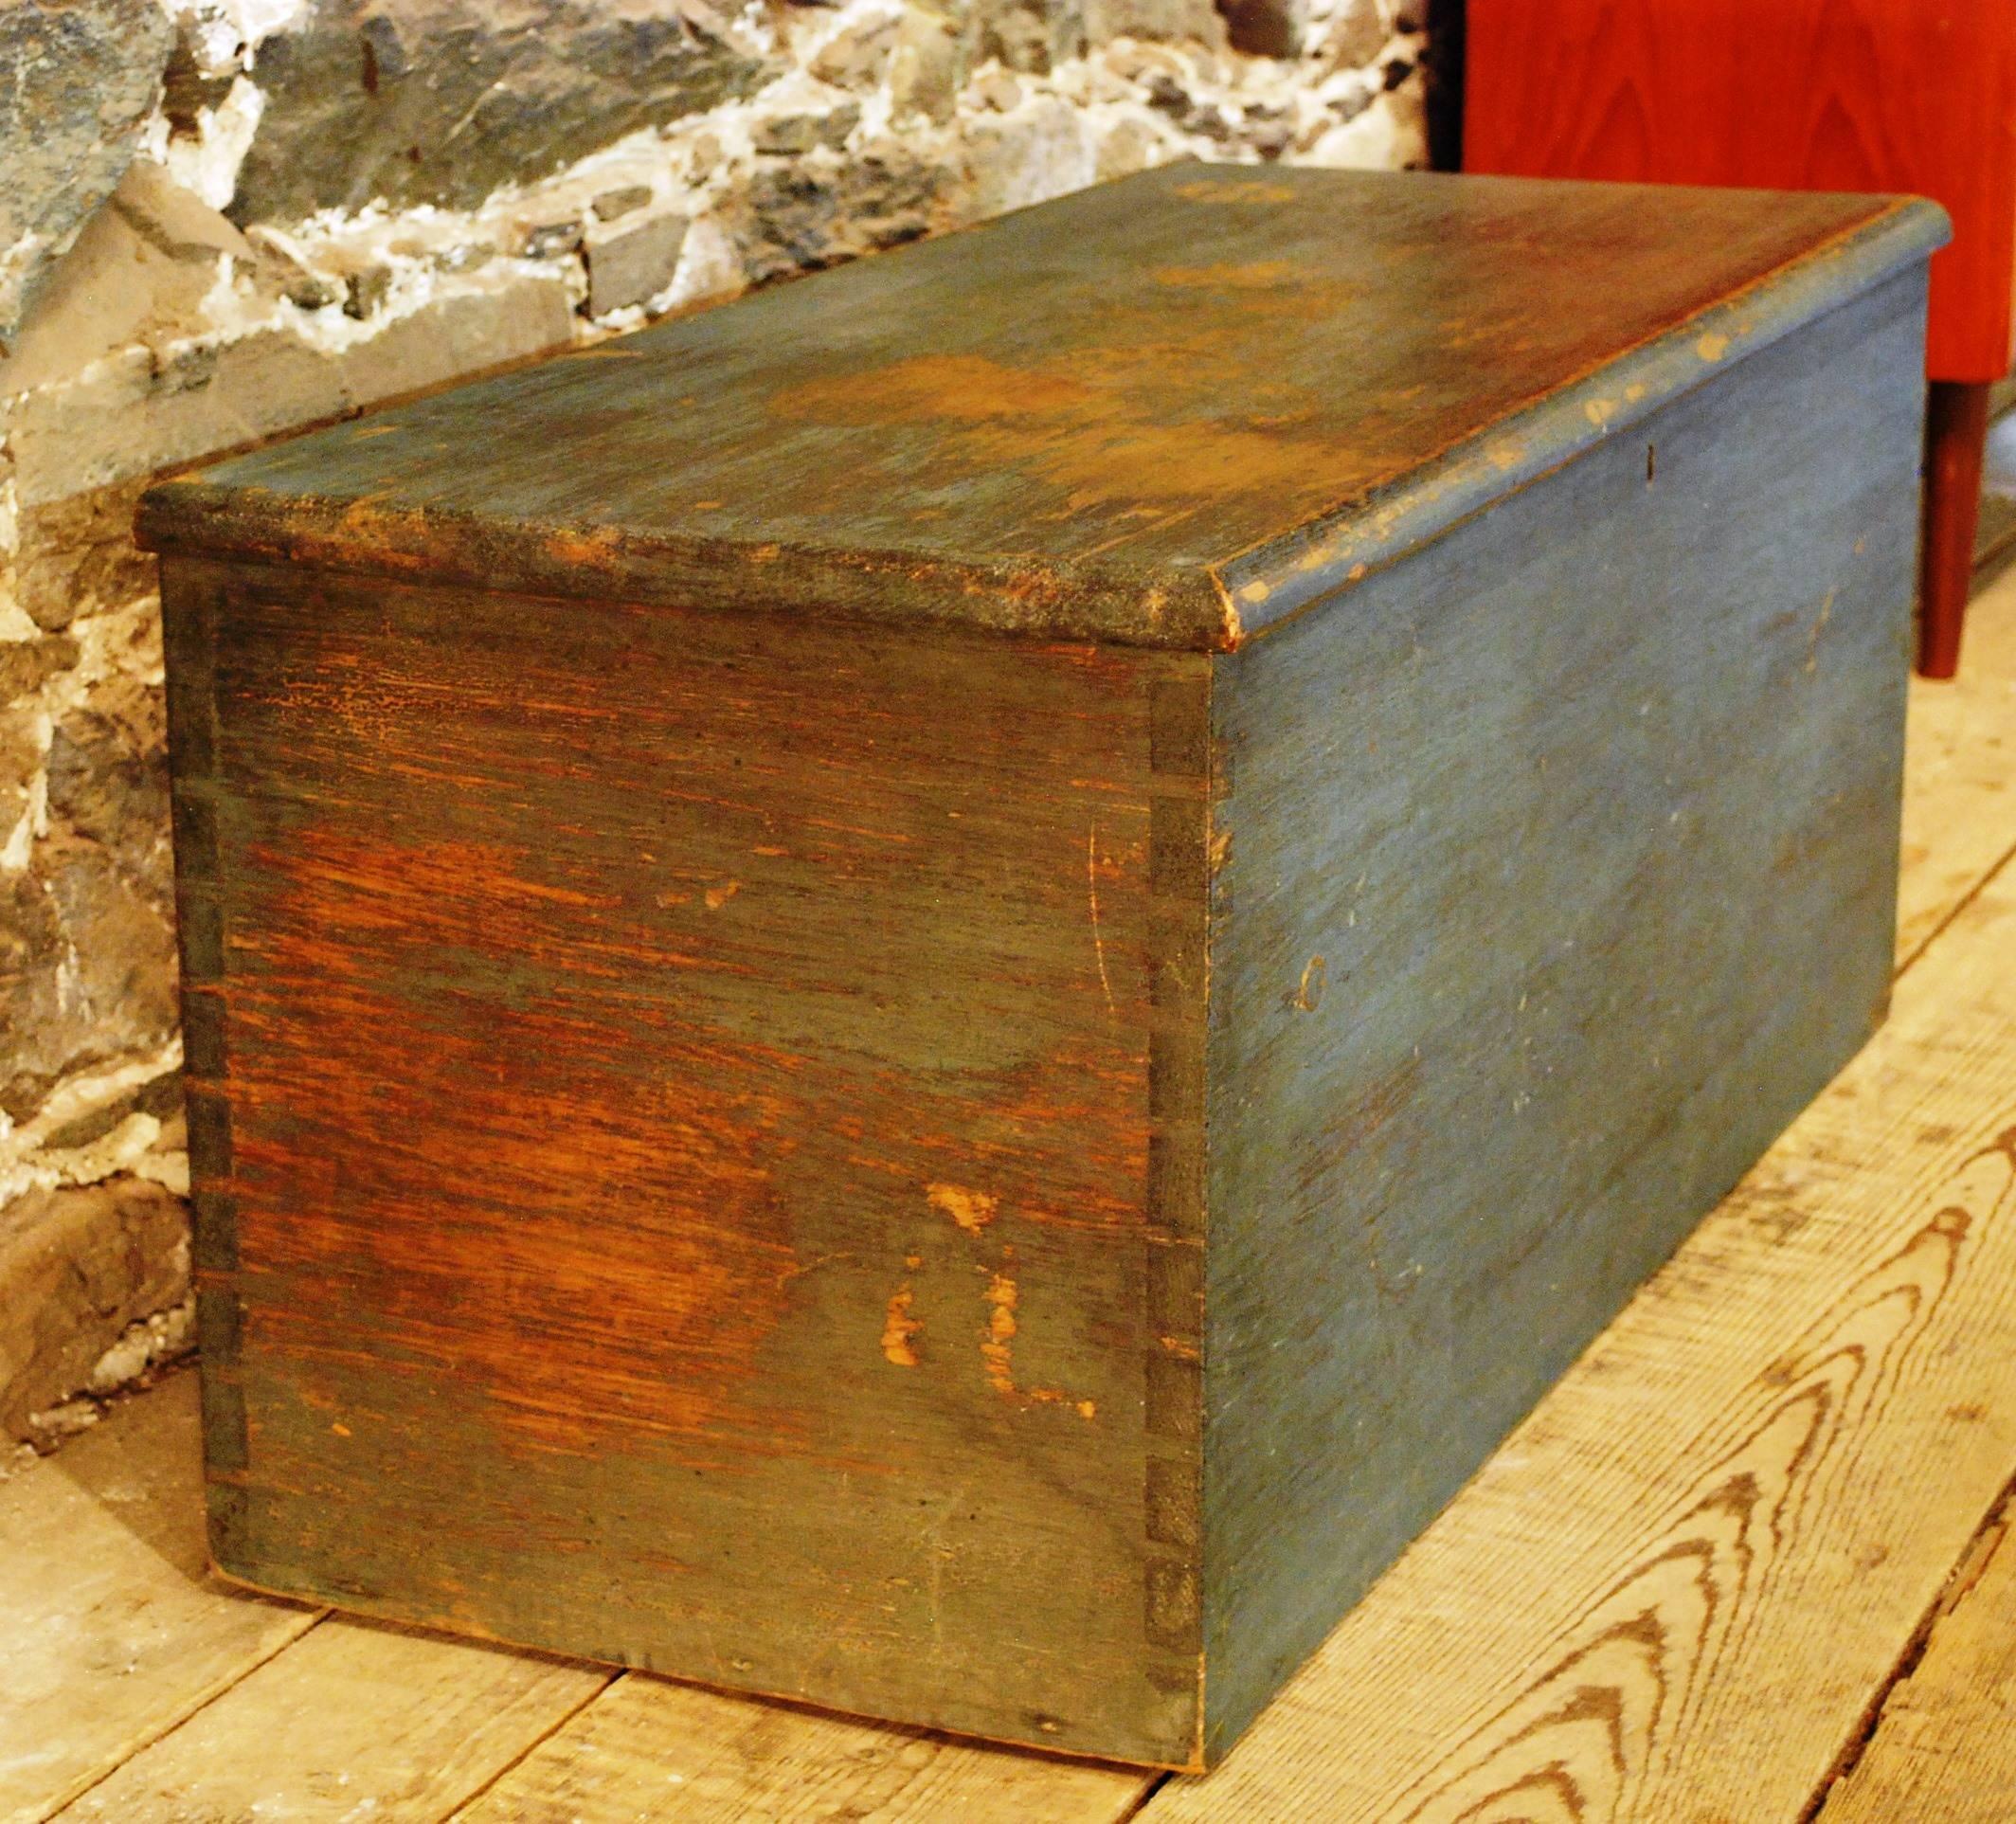 Antique flat top trunk with the original paint in very good condition. It has a Classic six board construction with hand dovetailed joinery and the original till. The trunk is a perfect size as a coffee table or a bench with useful clean storage.